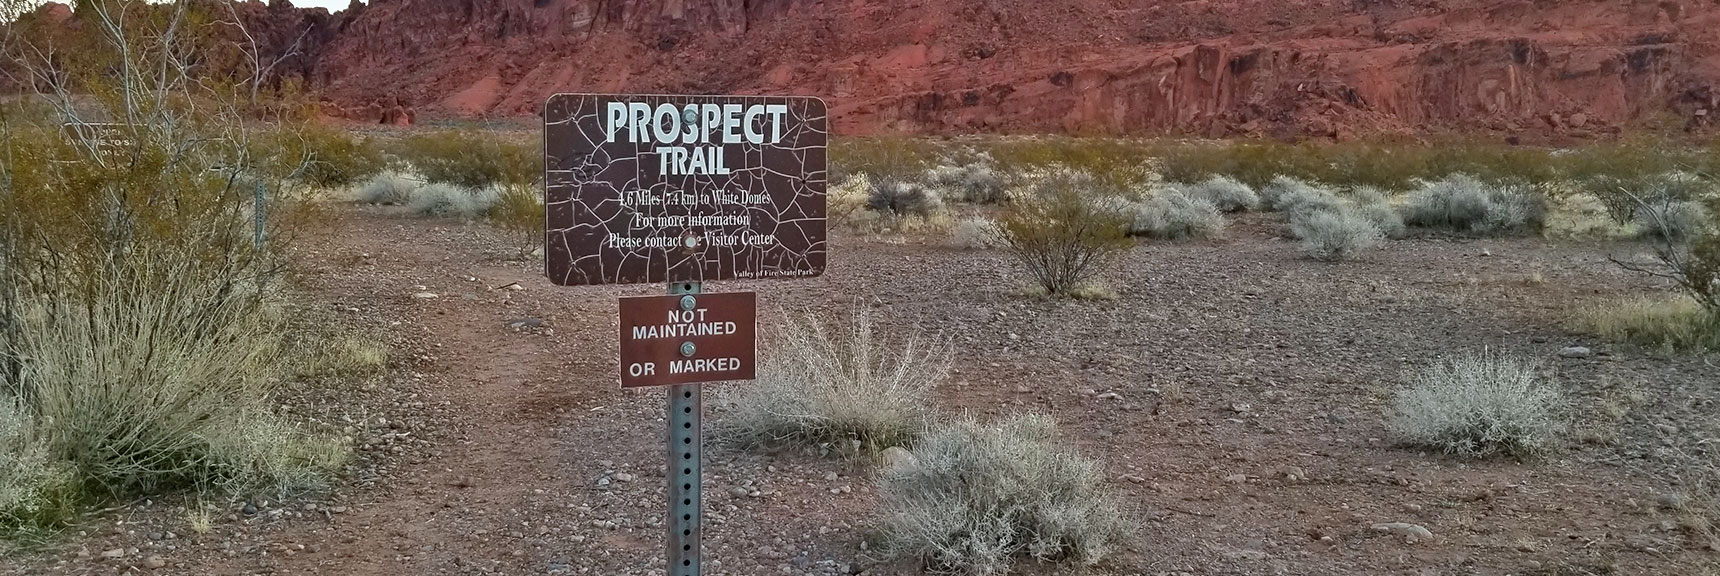 South Trailhead for Prospect Trail in Valley of Fire State Park, Nevada